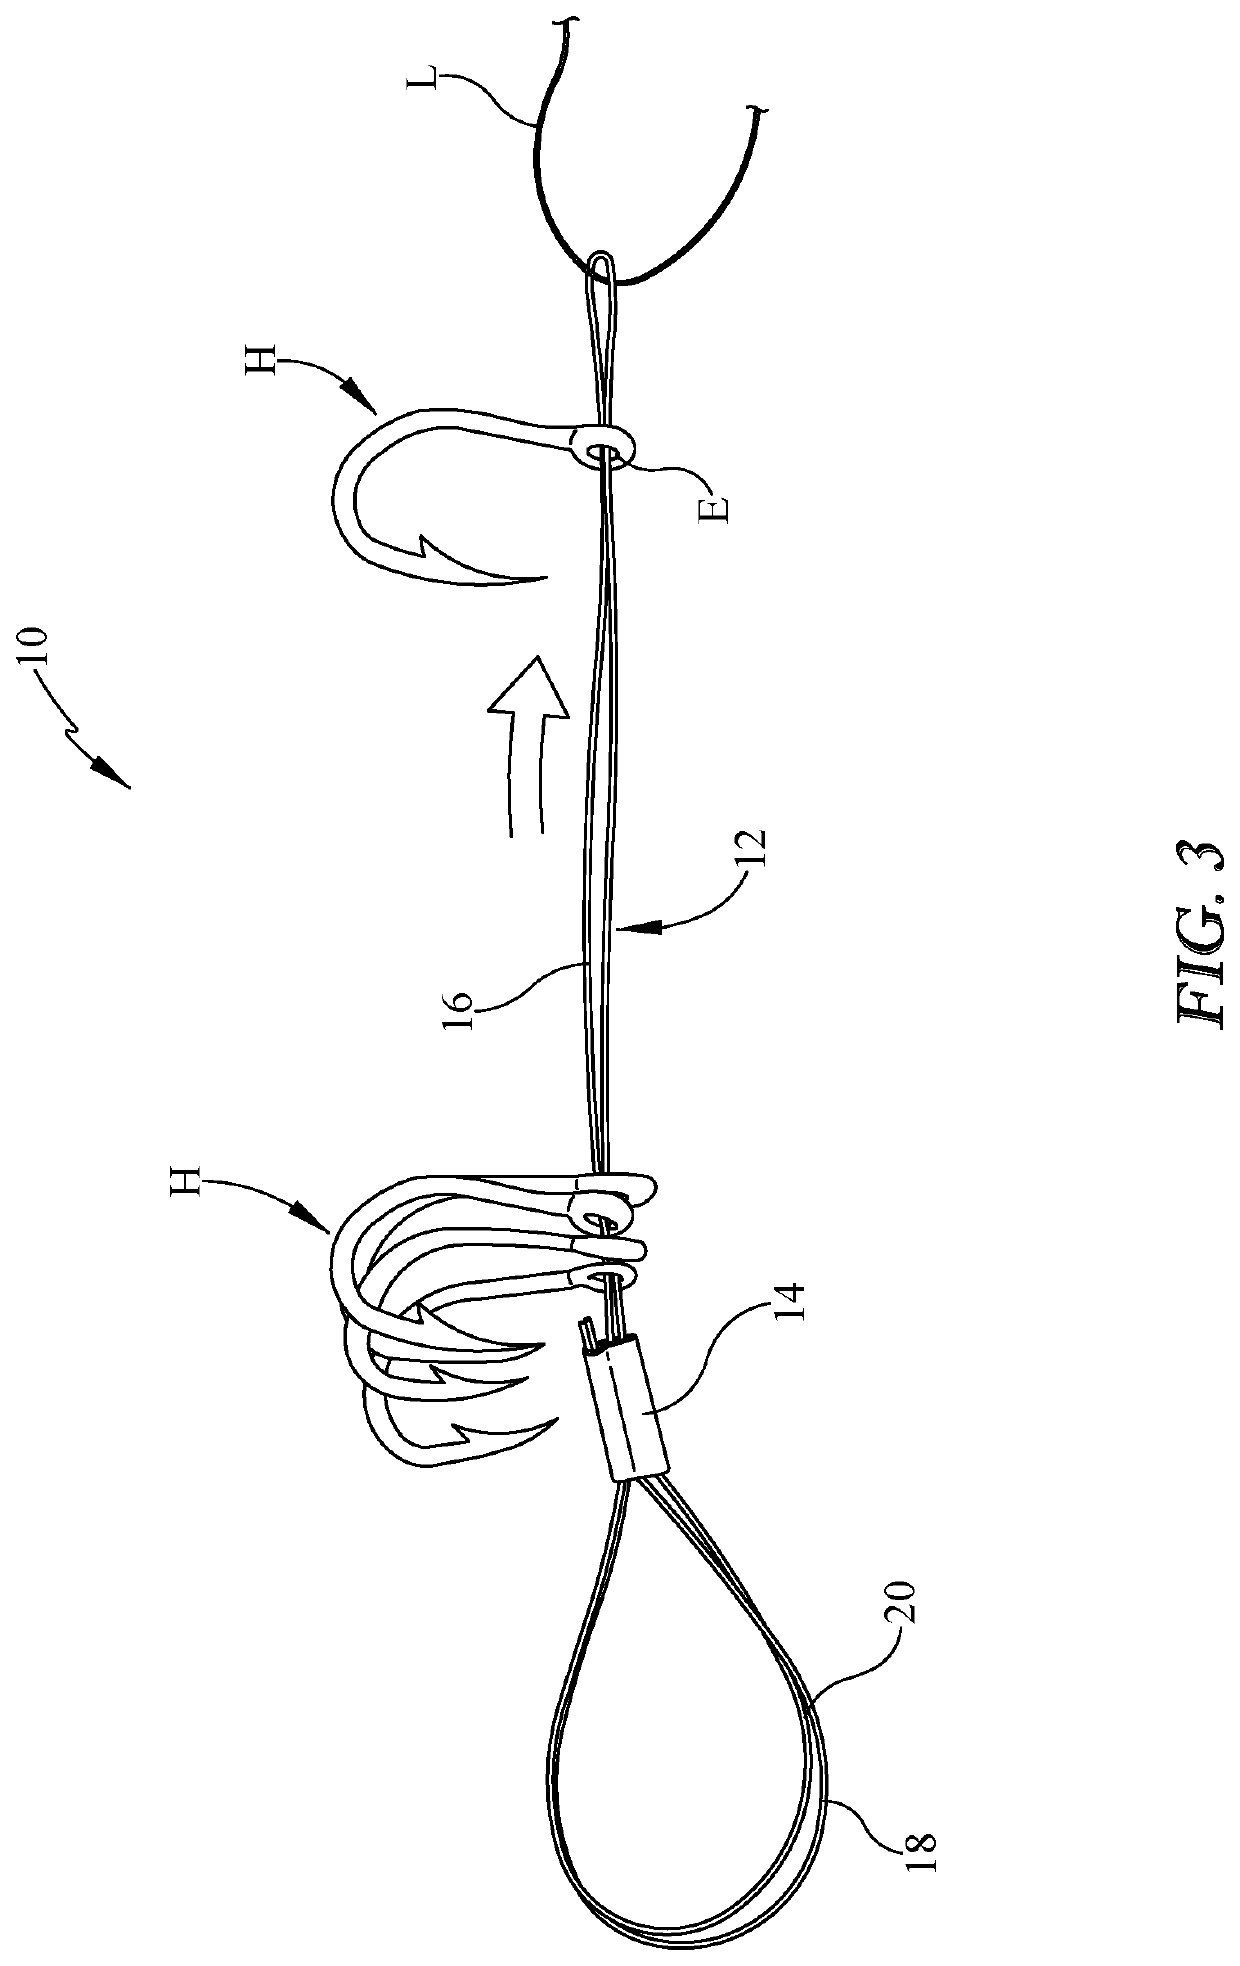 Eyed implement holding system